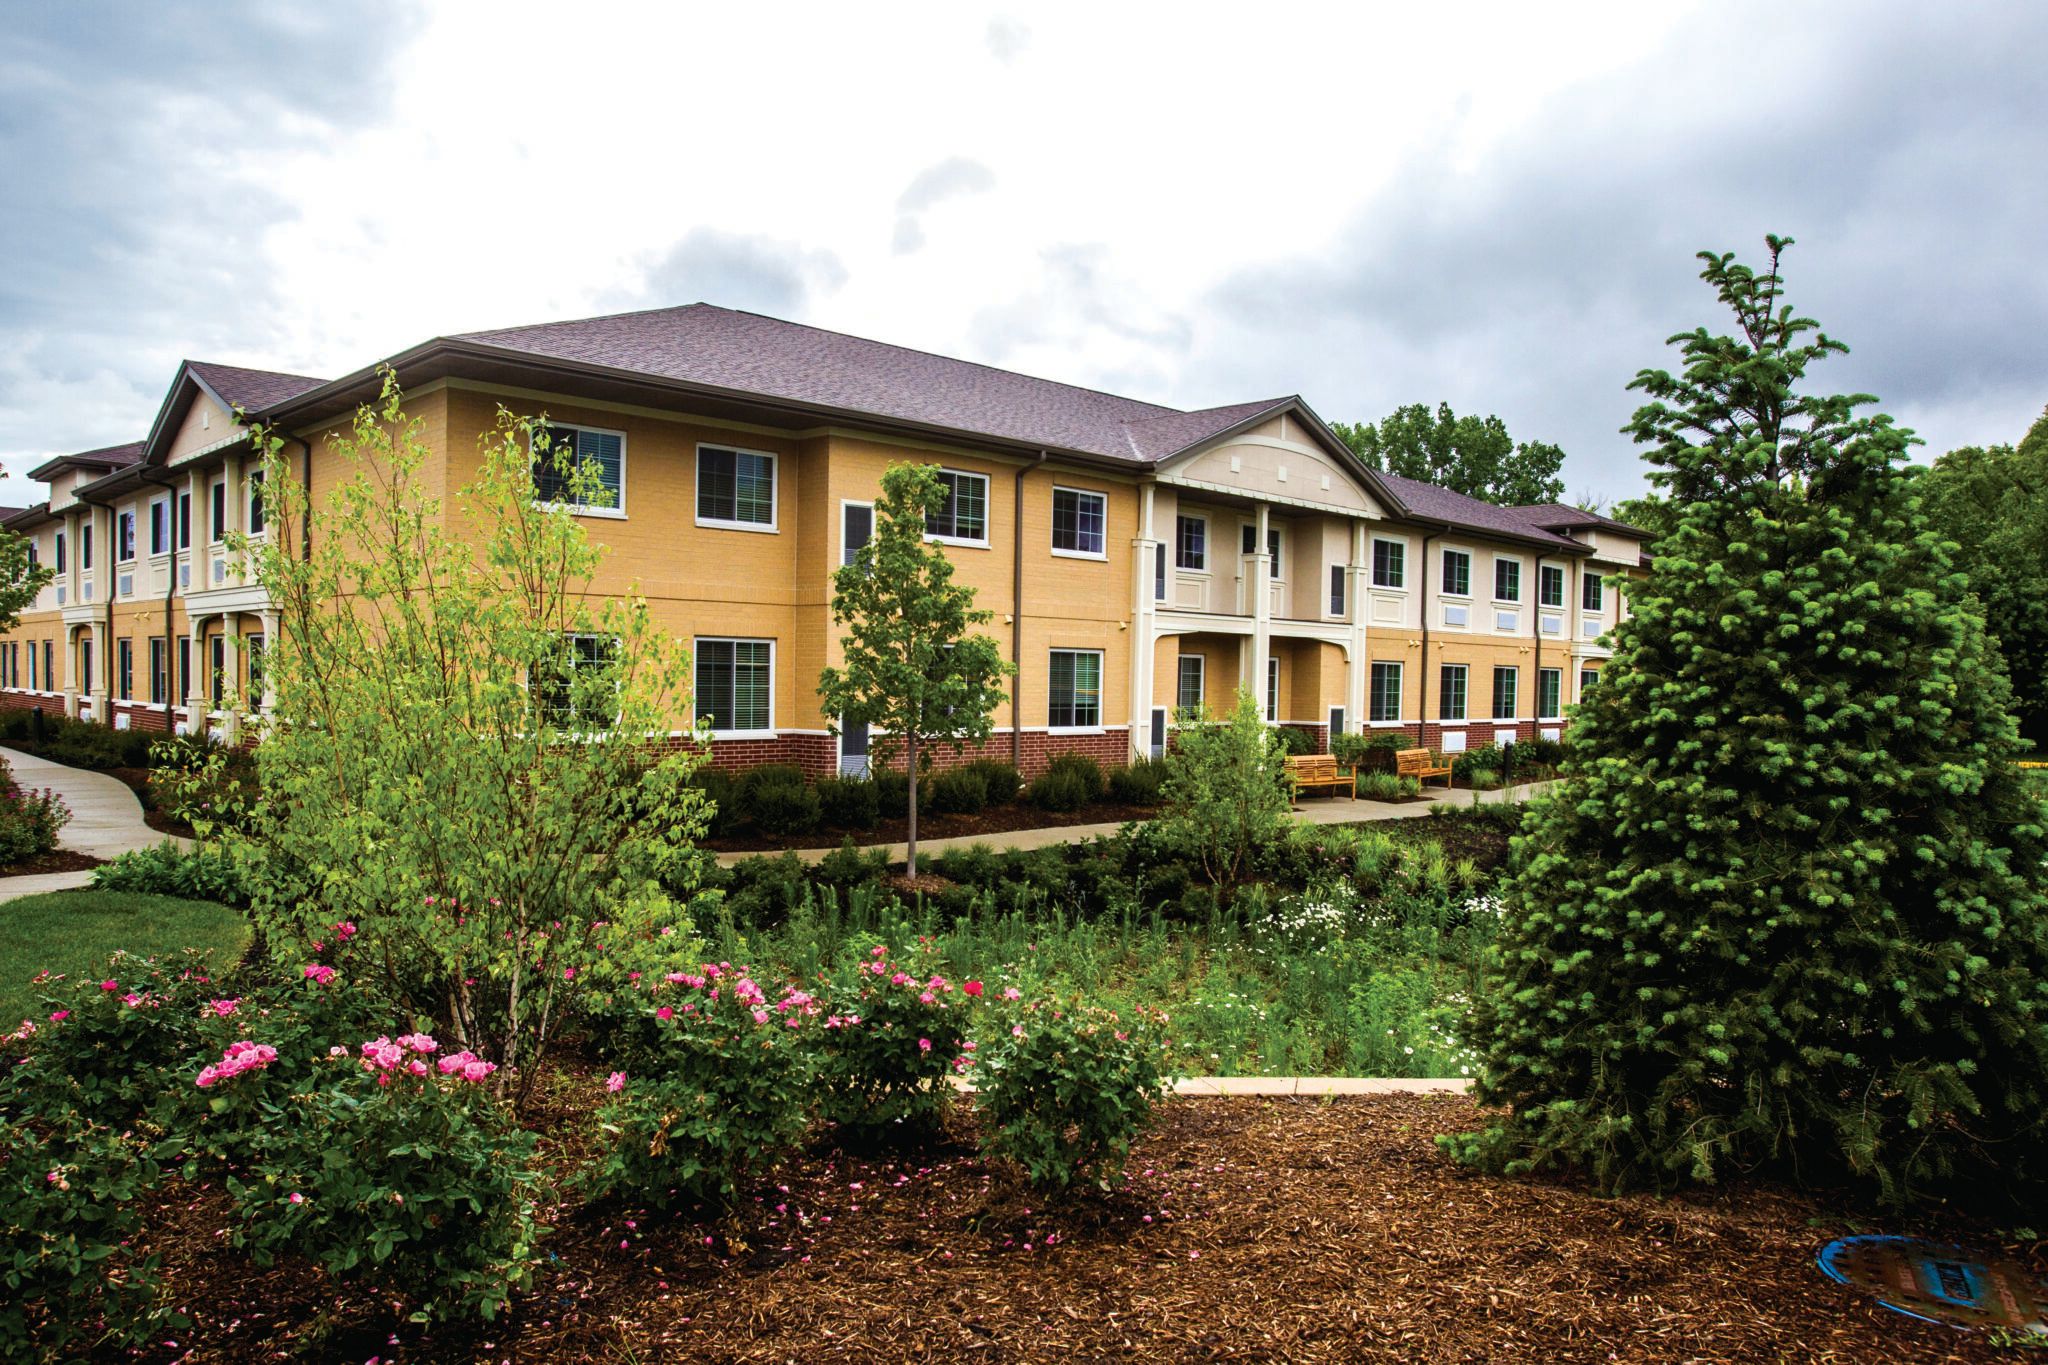 Senior living community, Cedar Lake Assisted Living and Memory Care, with lush greenery and urban architecture.